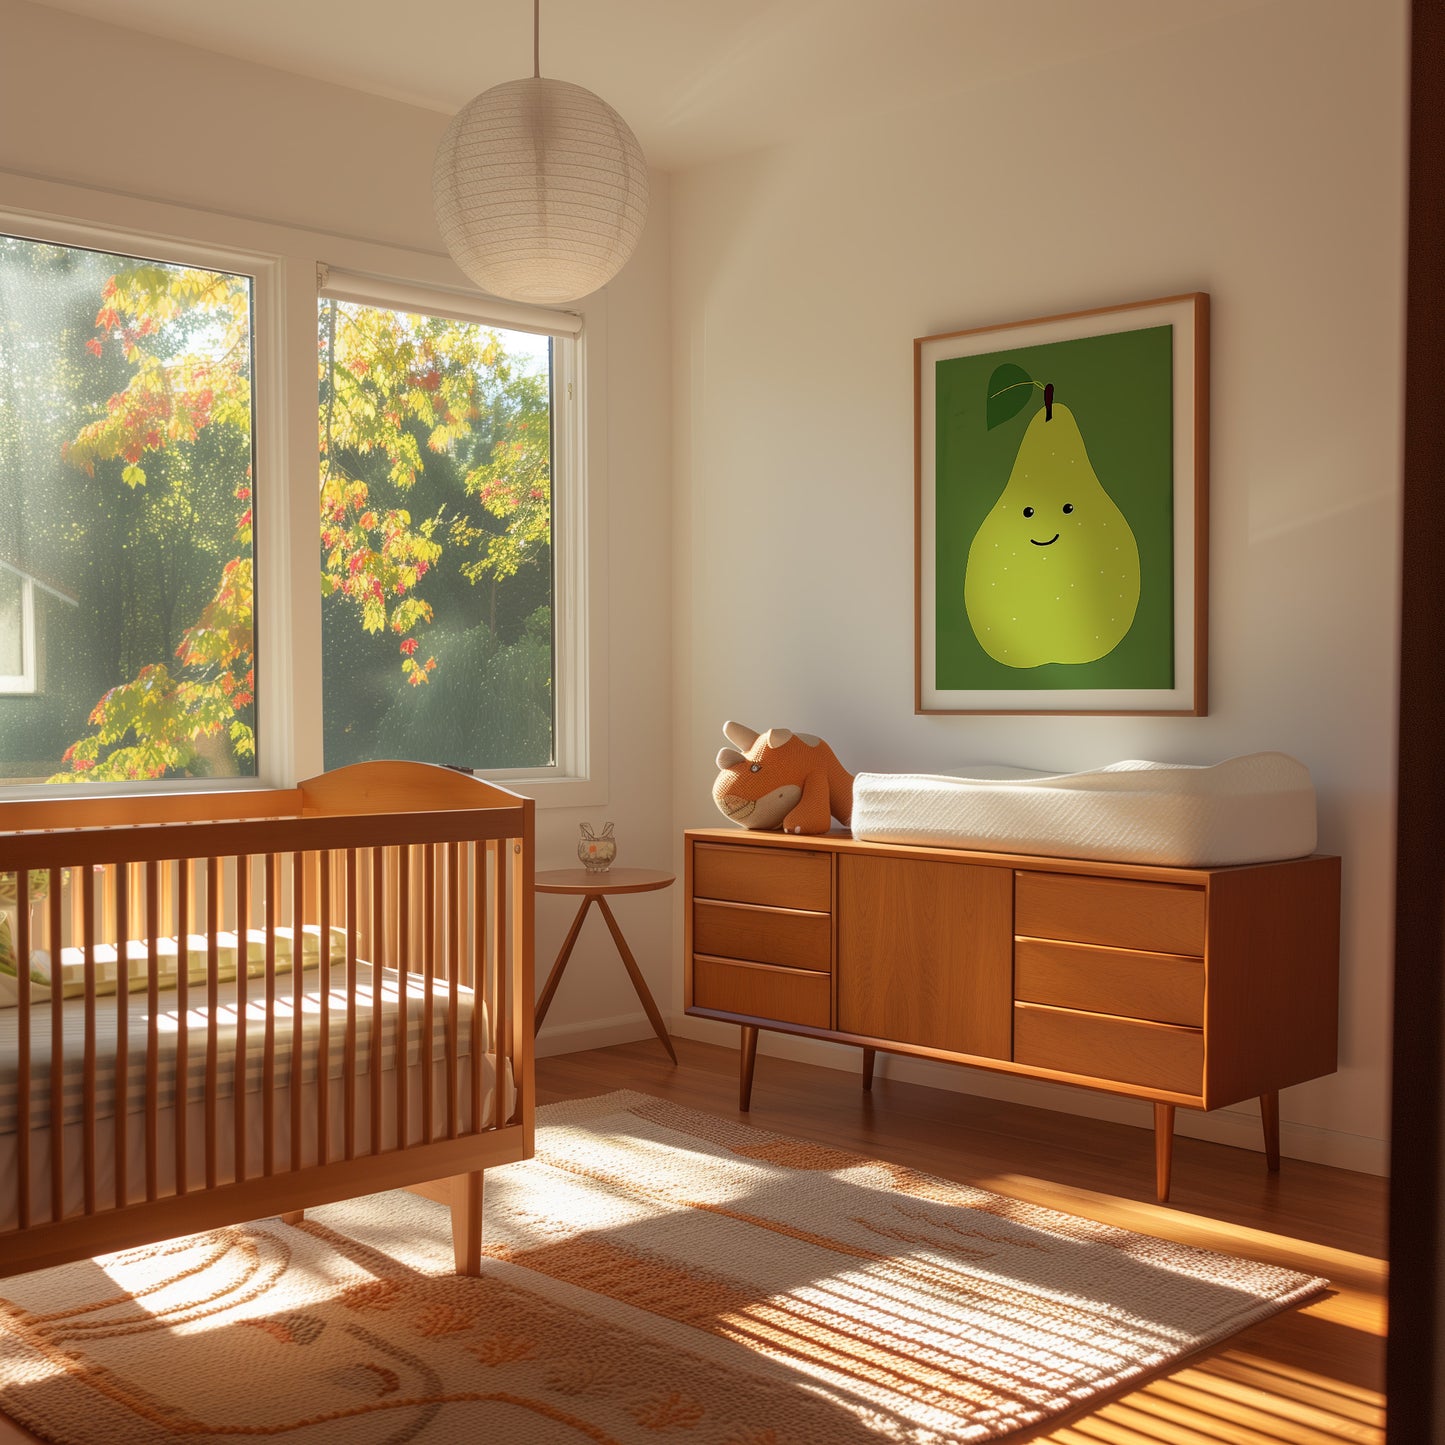 A sunny nursery room with a crib, dresser, and a picture of a pear on the wall.